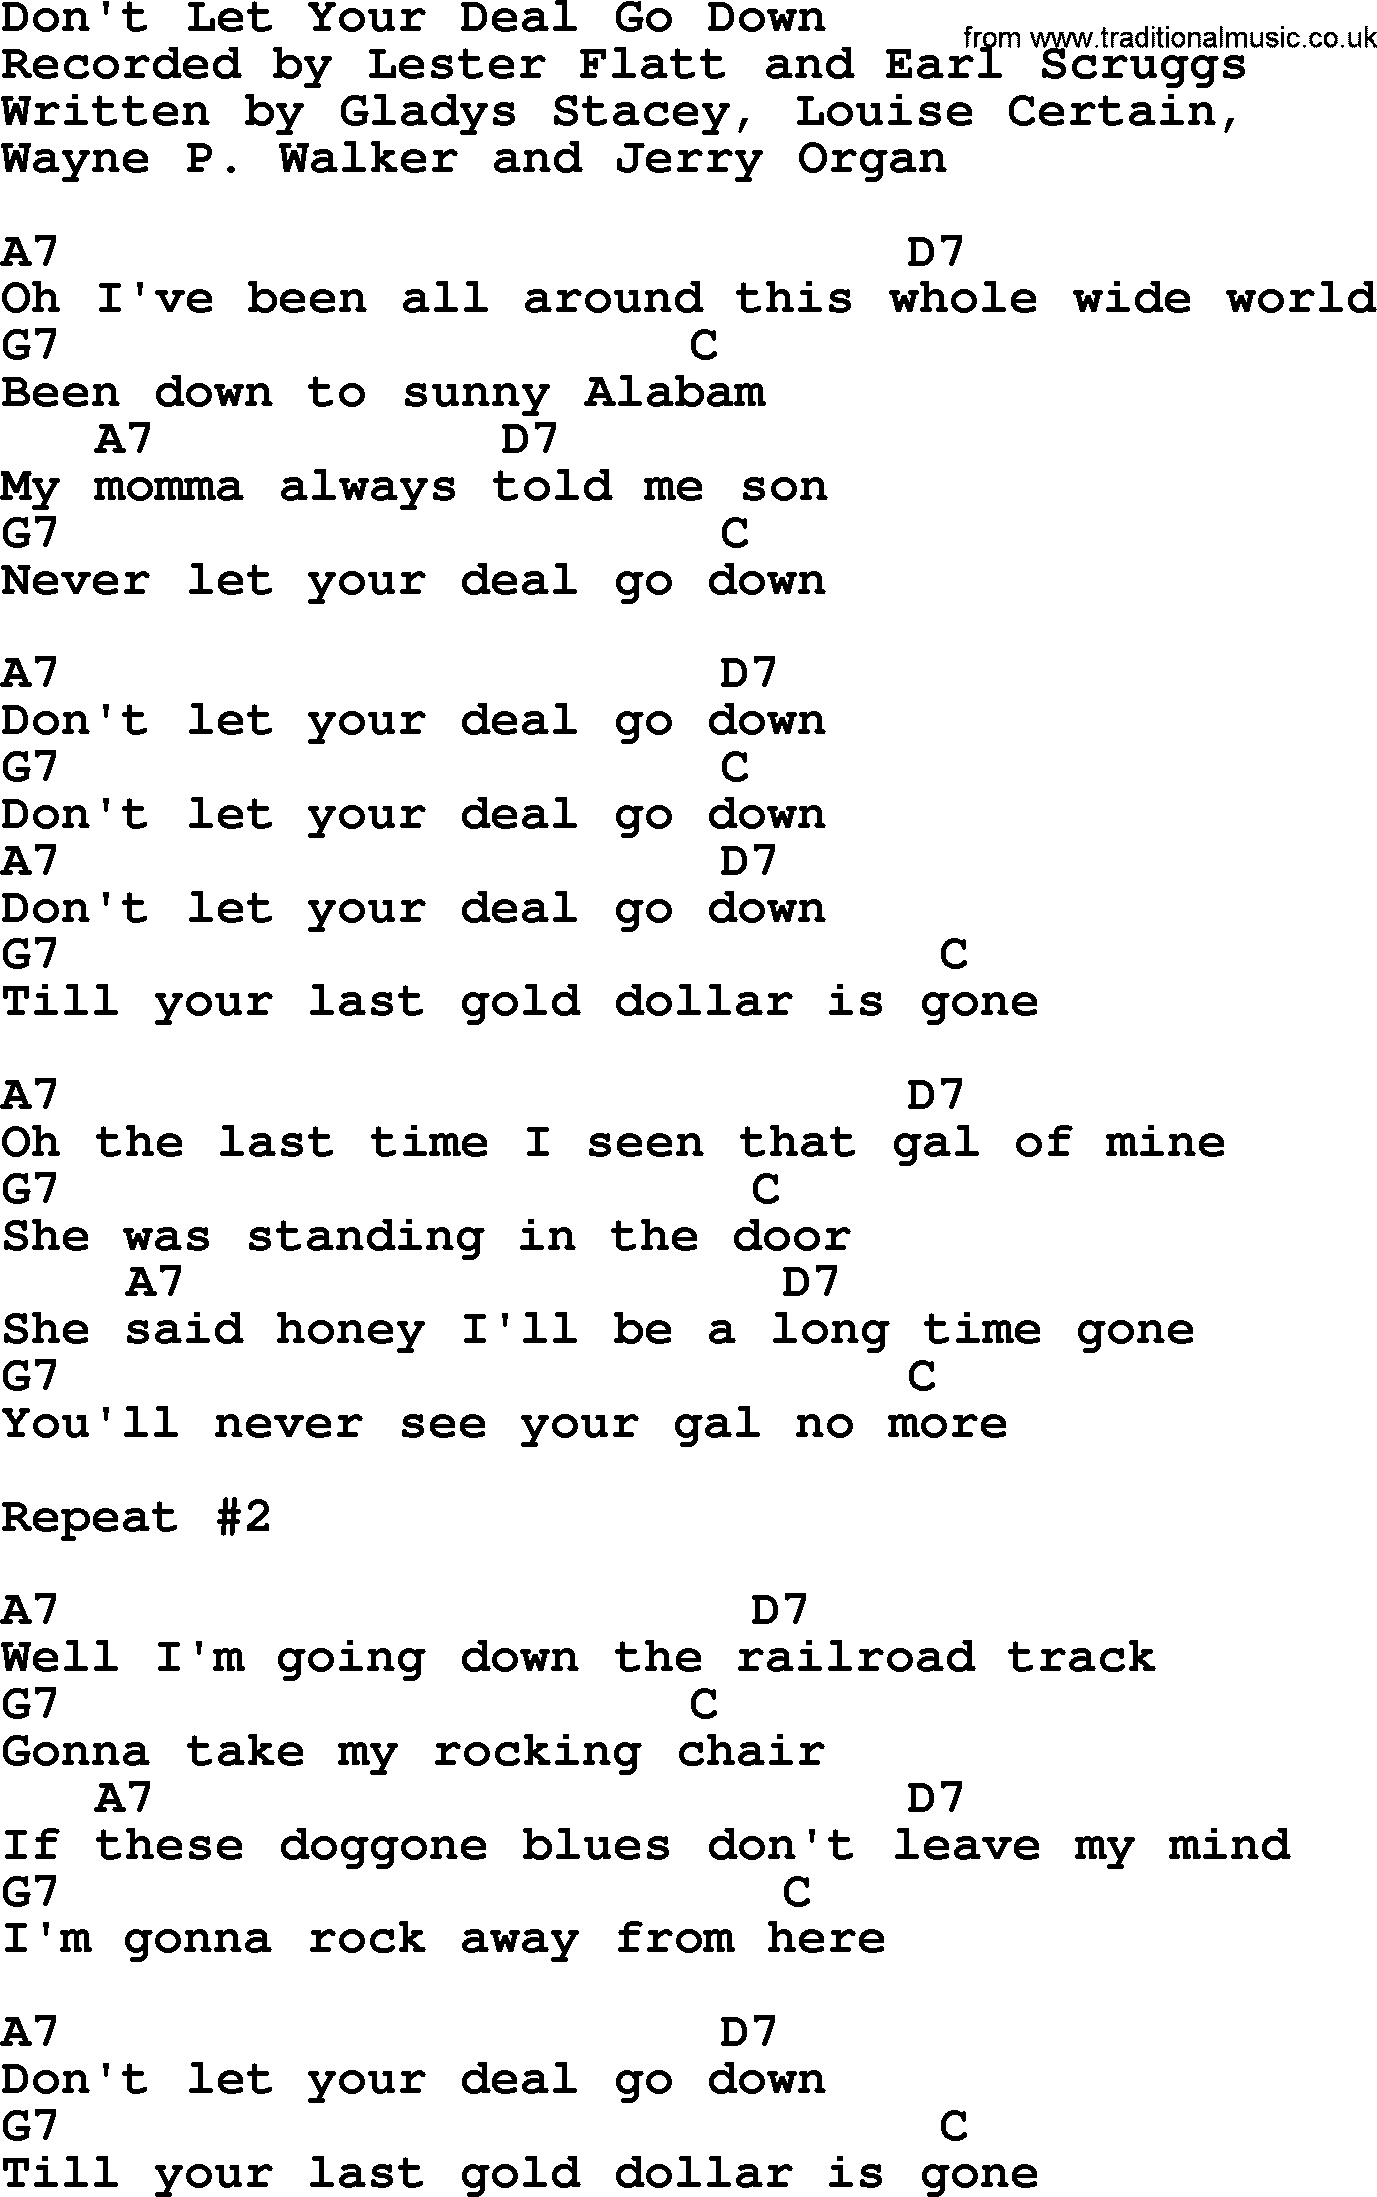 Bluegrass song: Don't Let Your Deal Go Down, lyrics and chords